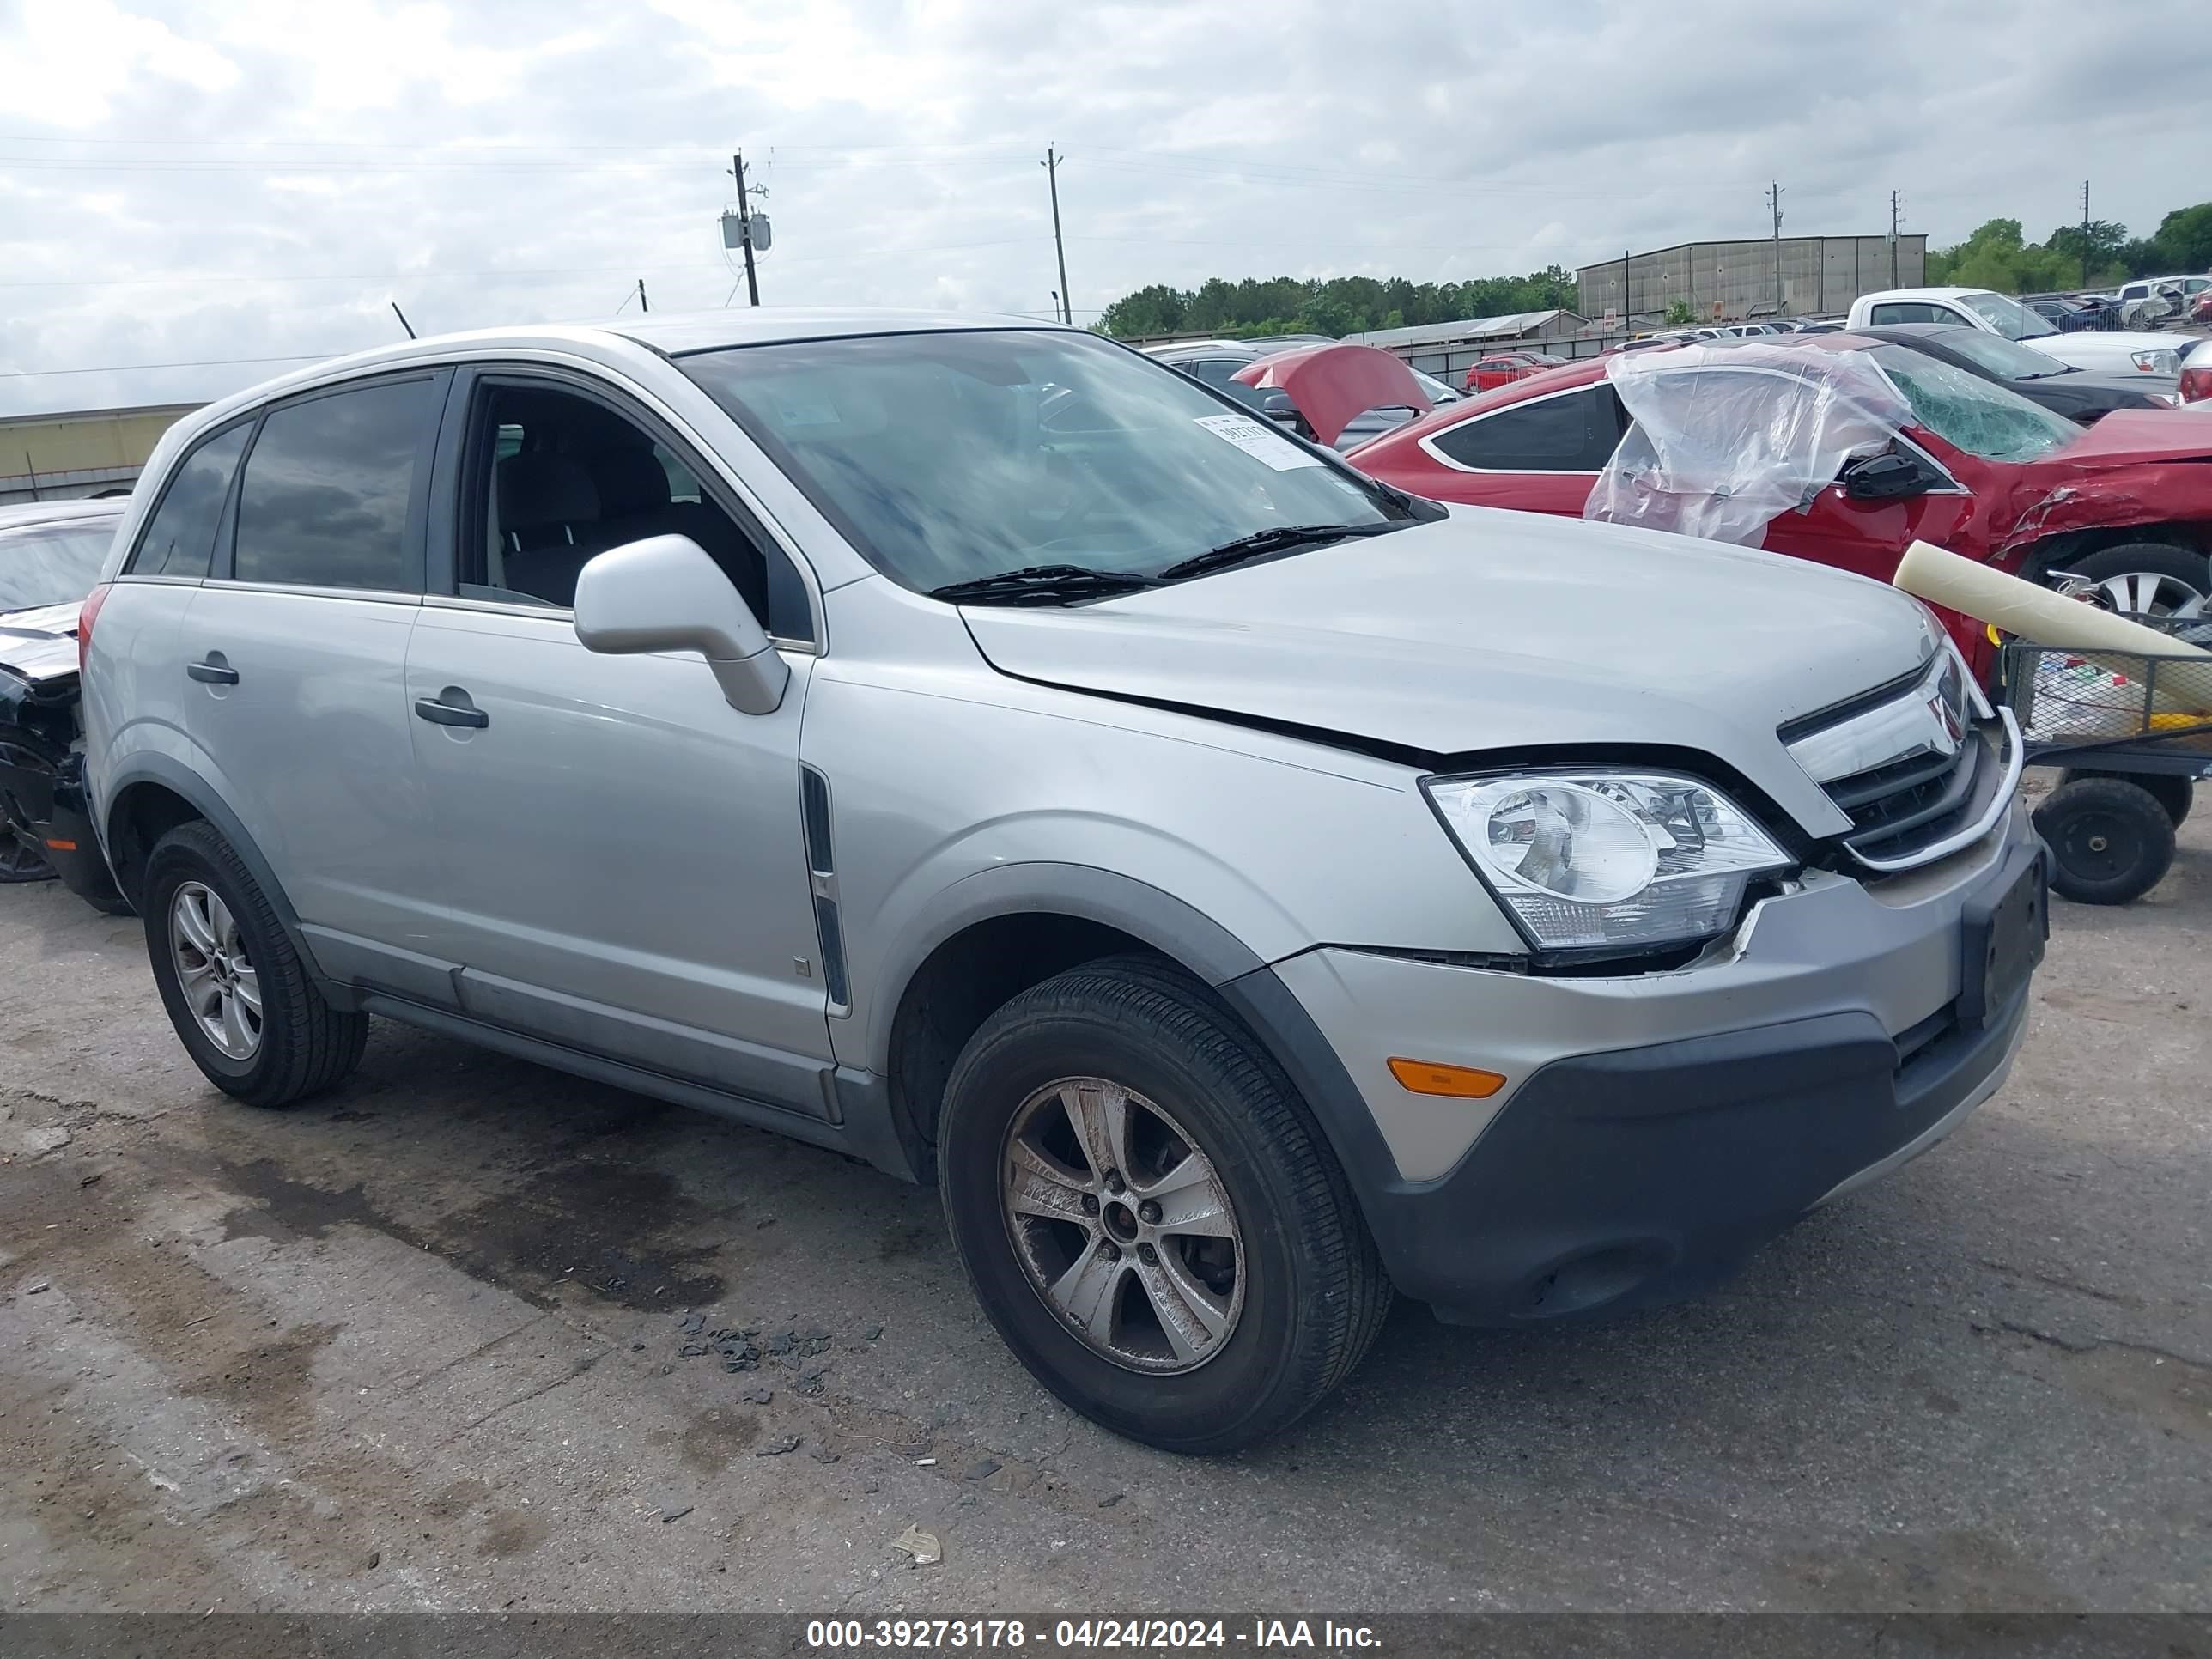 vin: 3GSCL33P69S584025 3GSCL33P69S584025 2009 saturn vue 2400 for Sale in 77038, 2535 West Mt. Houston Road, Houston, Texas, USA